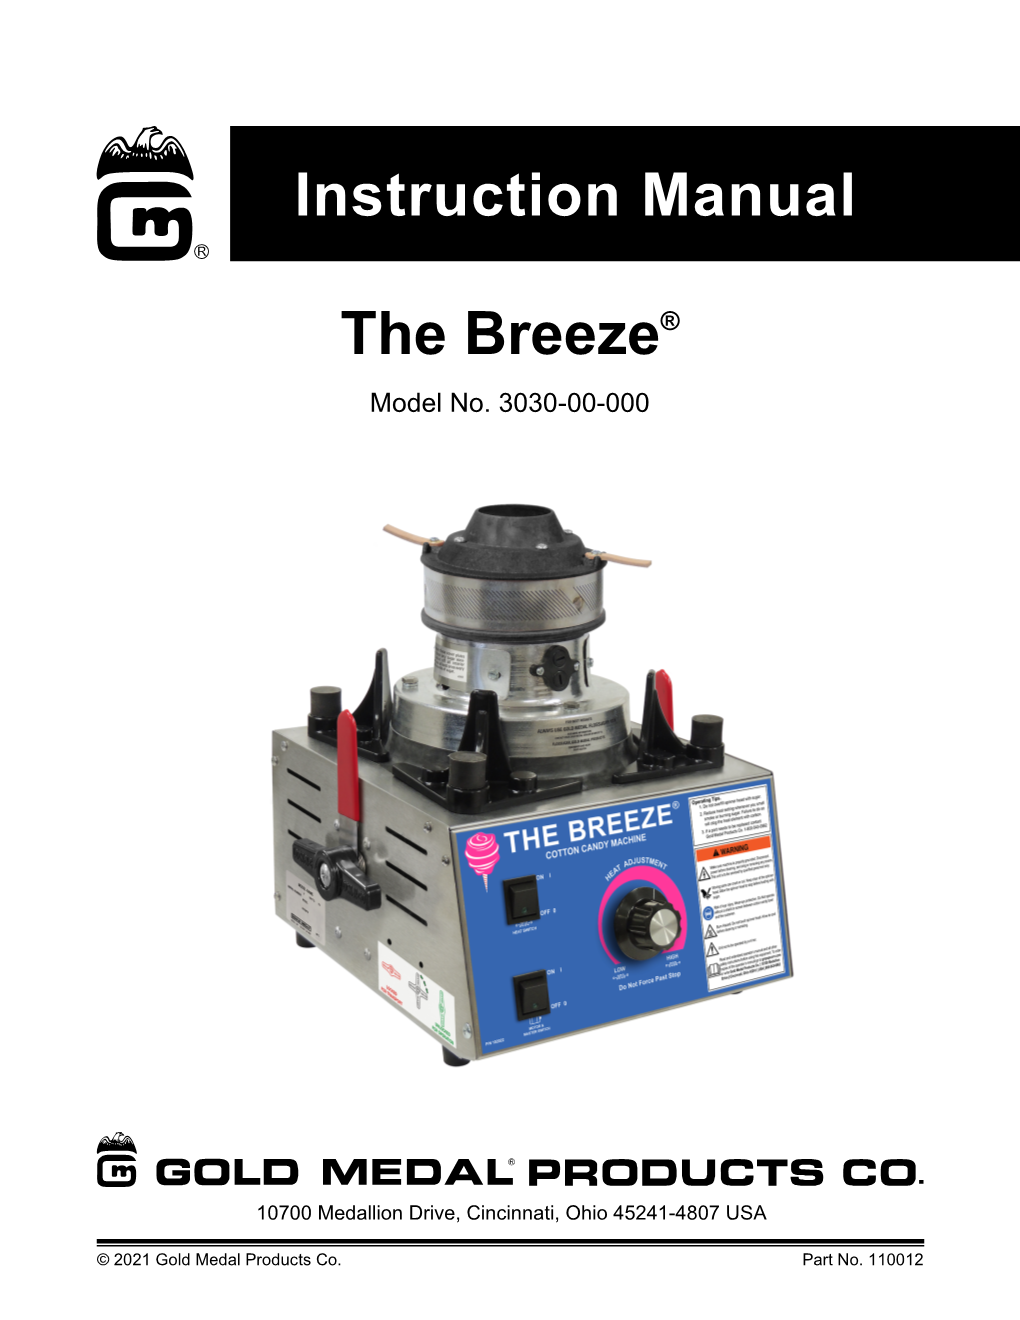 Instruction Manual the Breeze®